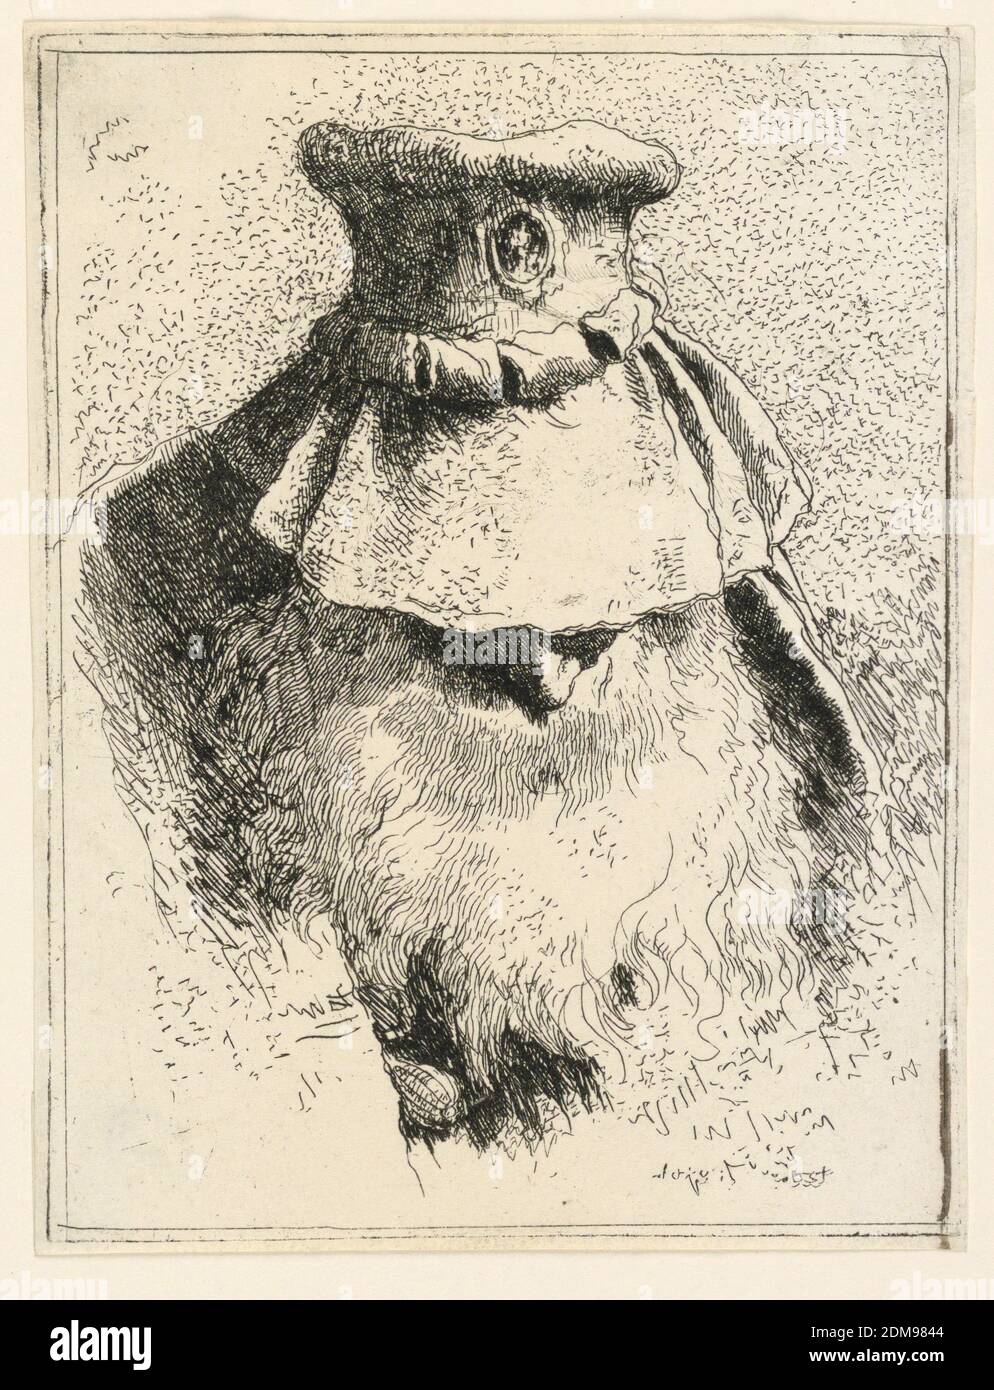 Old man with his face hidden in his hood, from the Raccolta di Teste, Giovanni Battista Tiepolo, Italian, 1692 - 1770, Etching on laid paper, Head of an old man in frontal view with his face bent downward. The big hat and beard leave only his nose visible from his face., Italy, 1770–1774, figures, Print Stock Photo